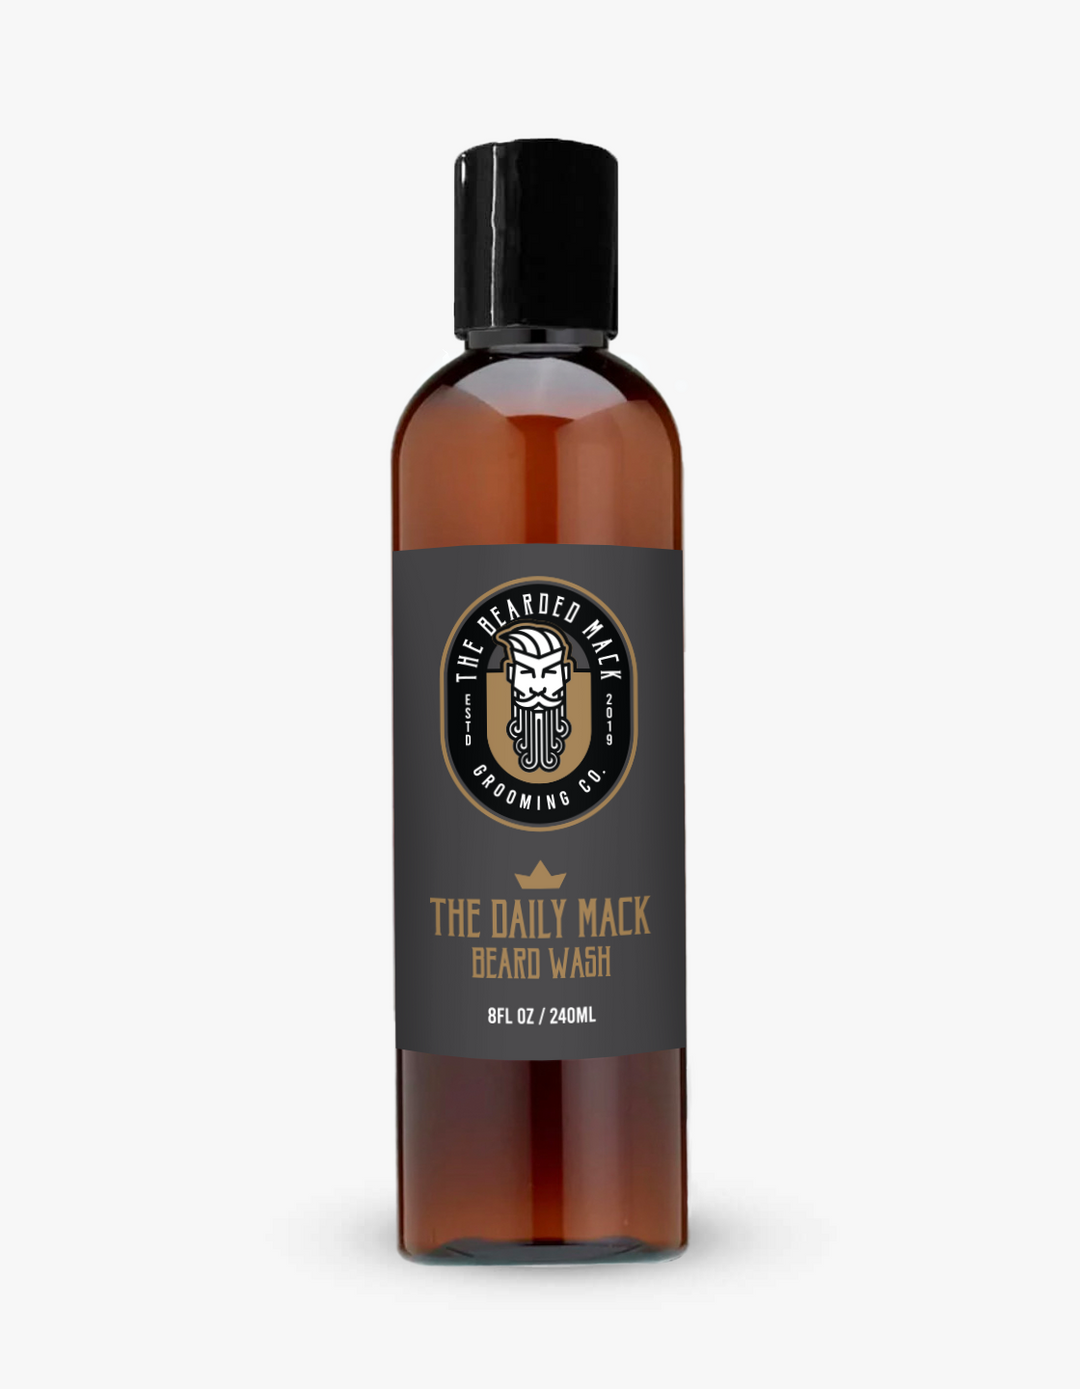 The Daily Mack Beard Wash - Natural (Unscented) Beard Wash The Bearded Mack Grooming CO   